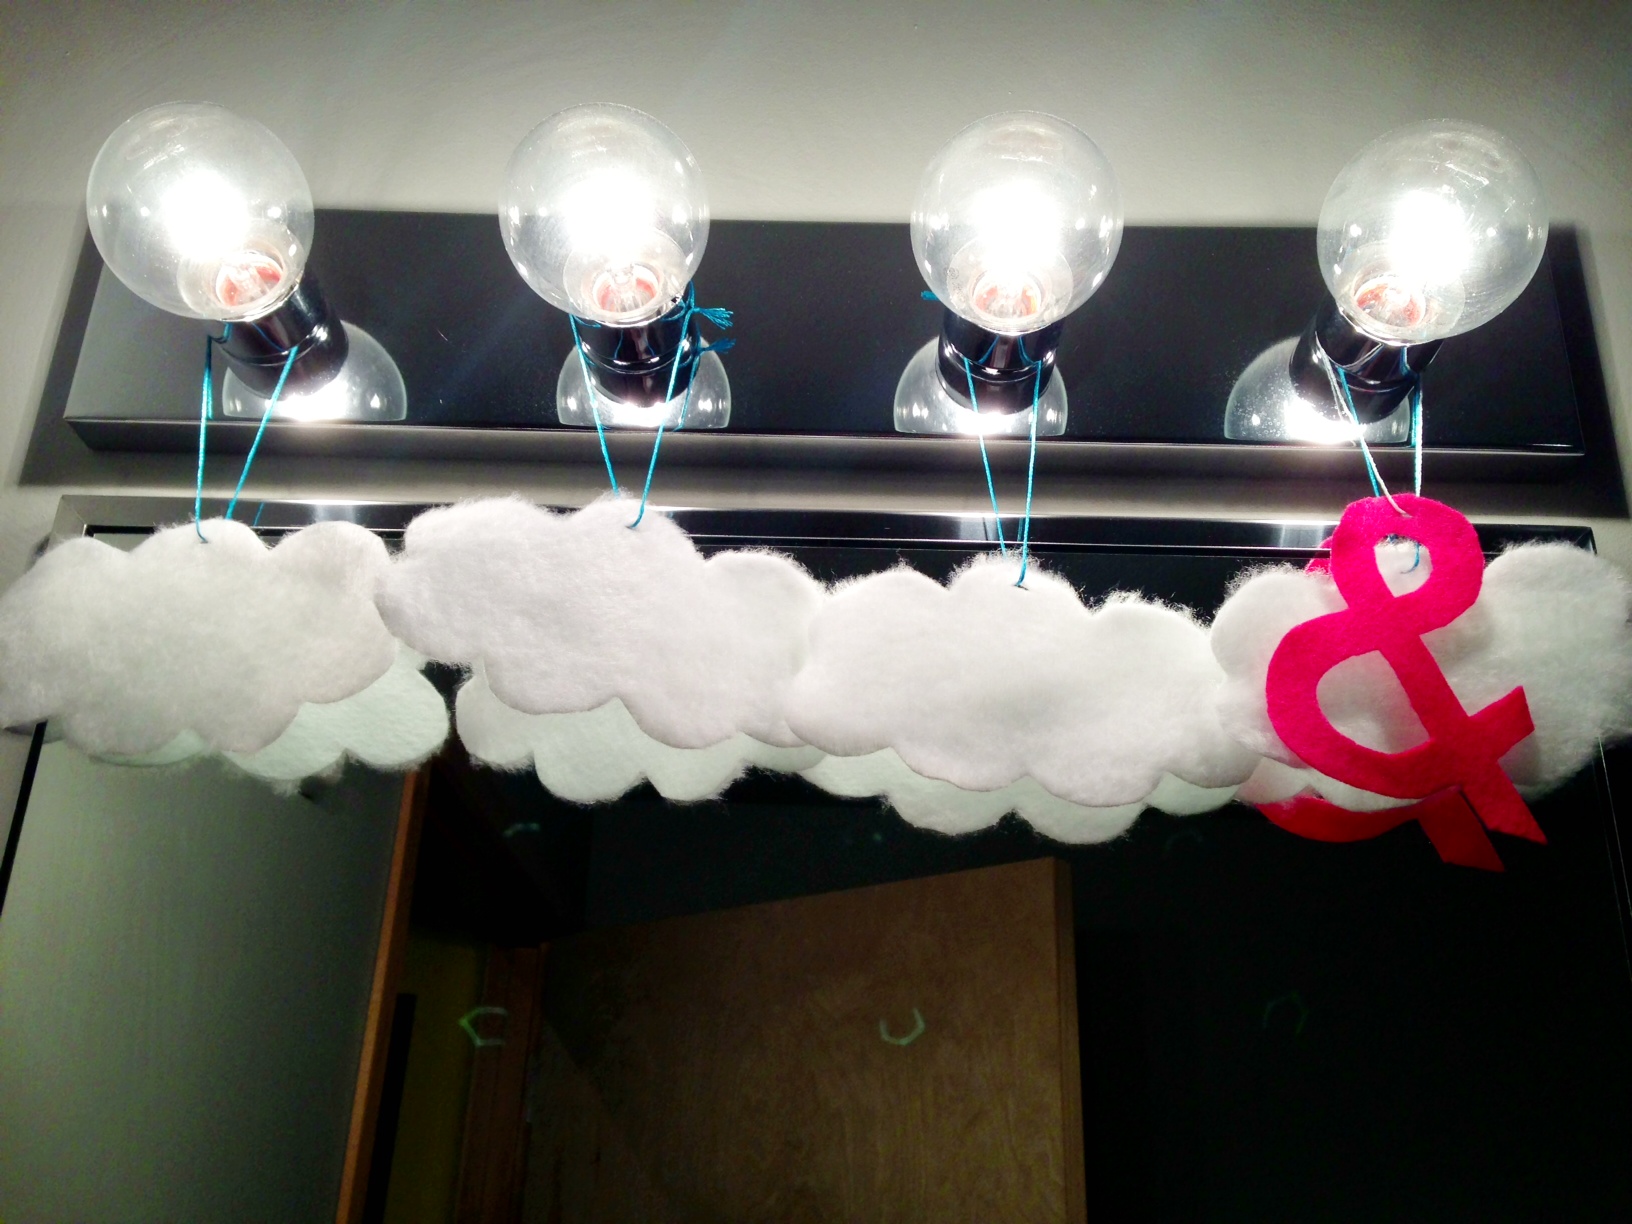 cloud and ampersand felt ornaments hanging from a row of lights